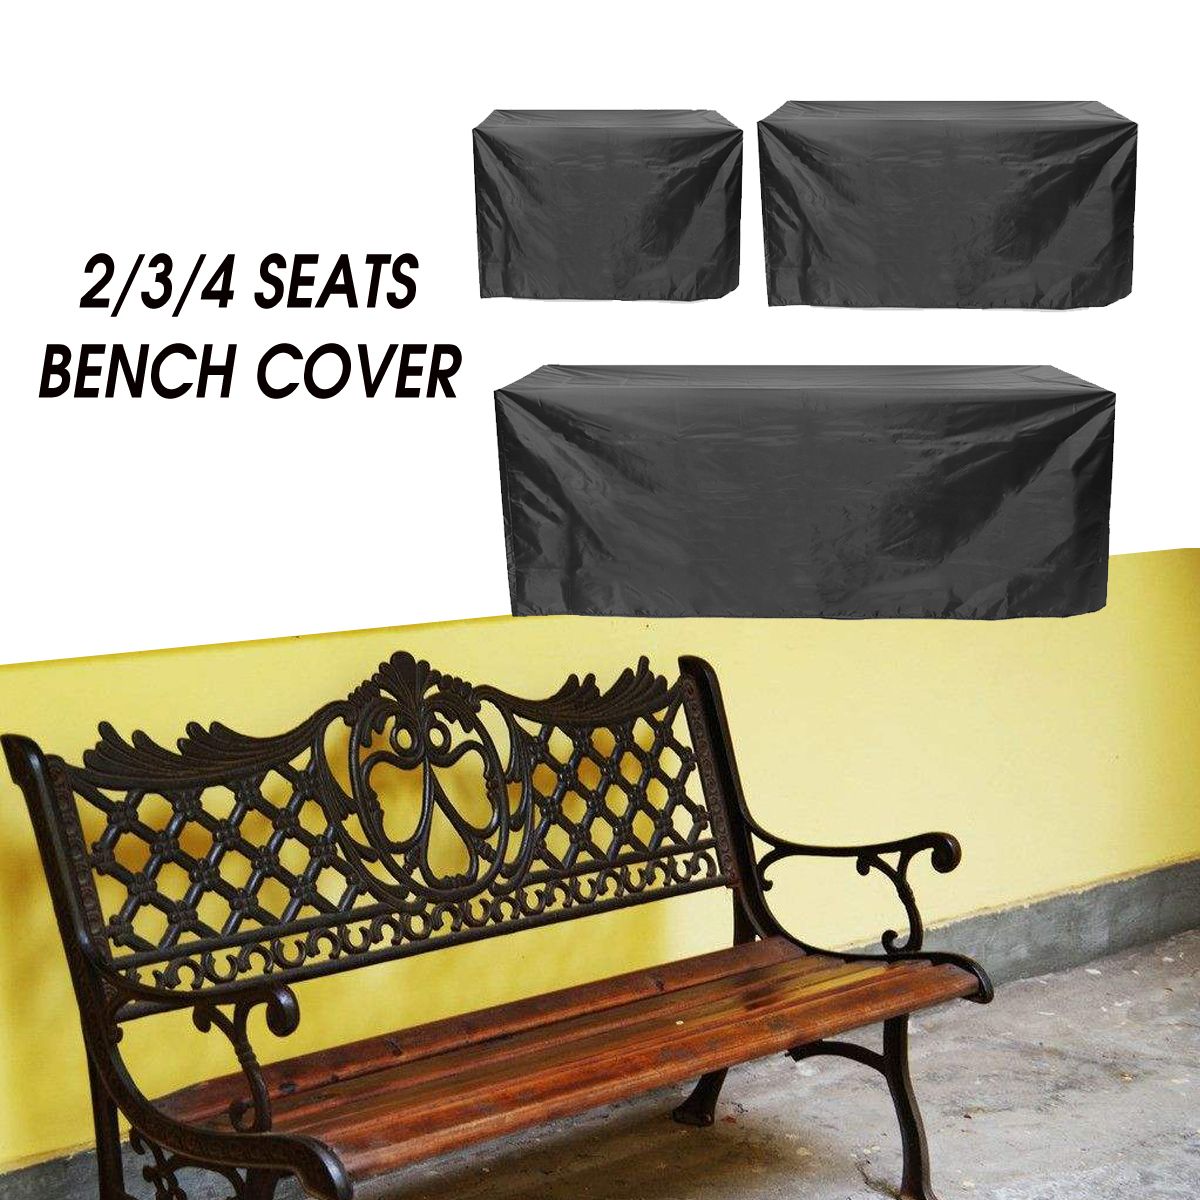 Waterproof-Furniture-Sofa-Bench-Table-Chair-Covers-234-Seaters-Garden-Outdoor-Patio-furniture-Cover-1446119